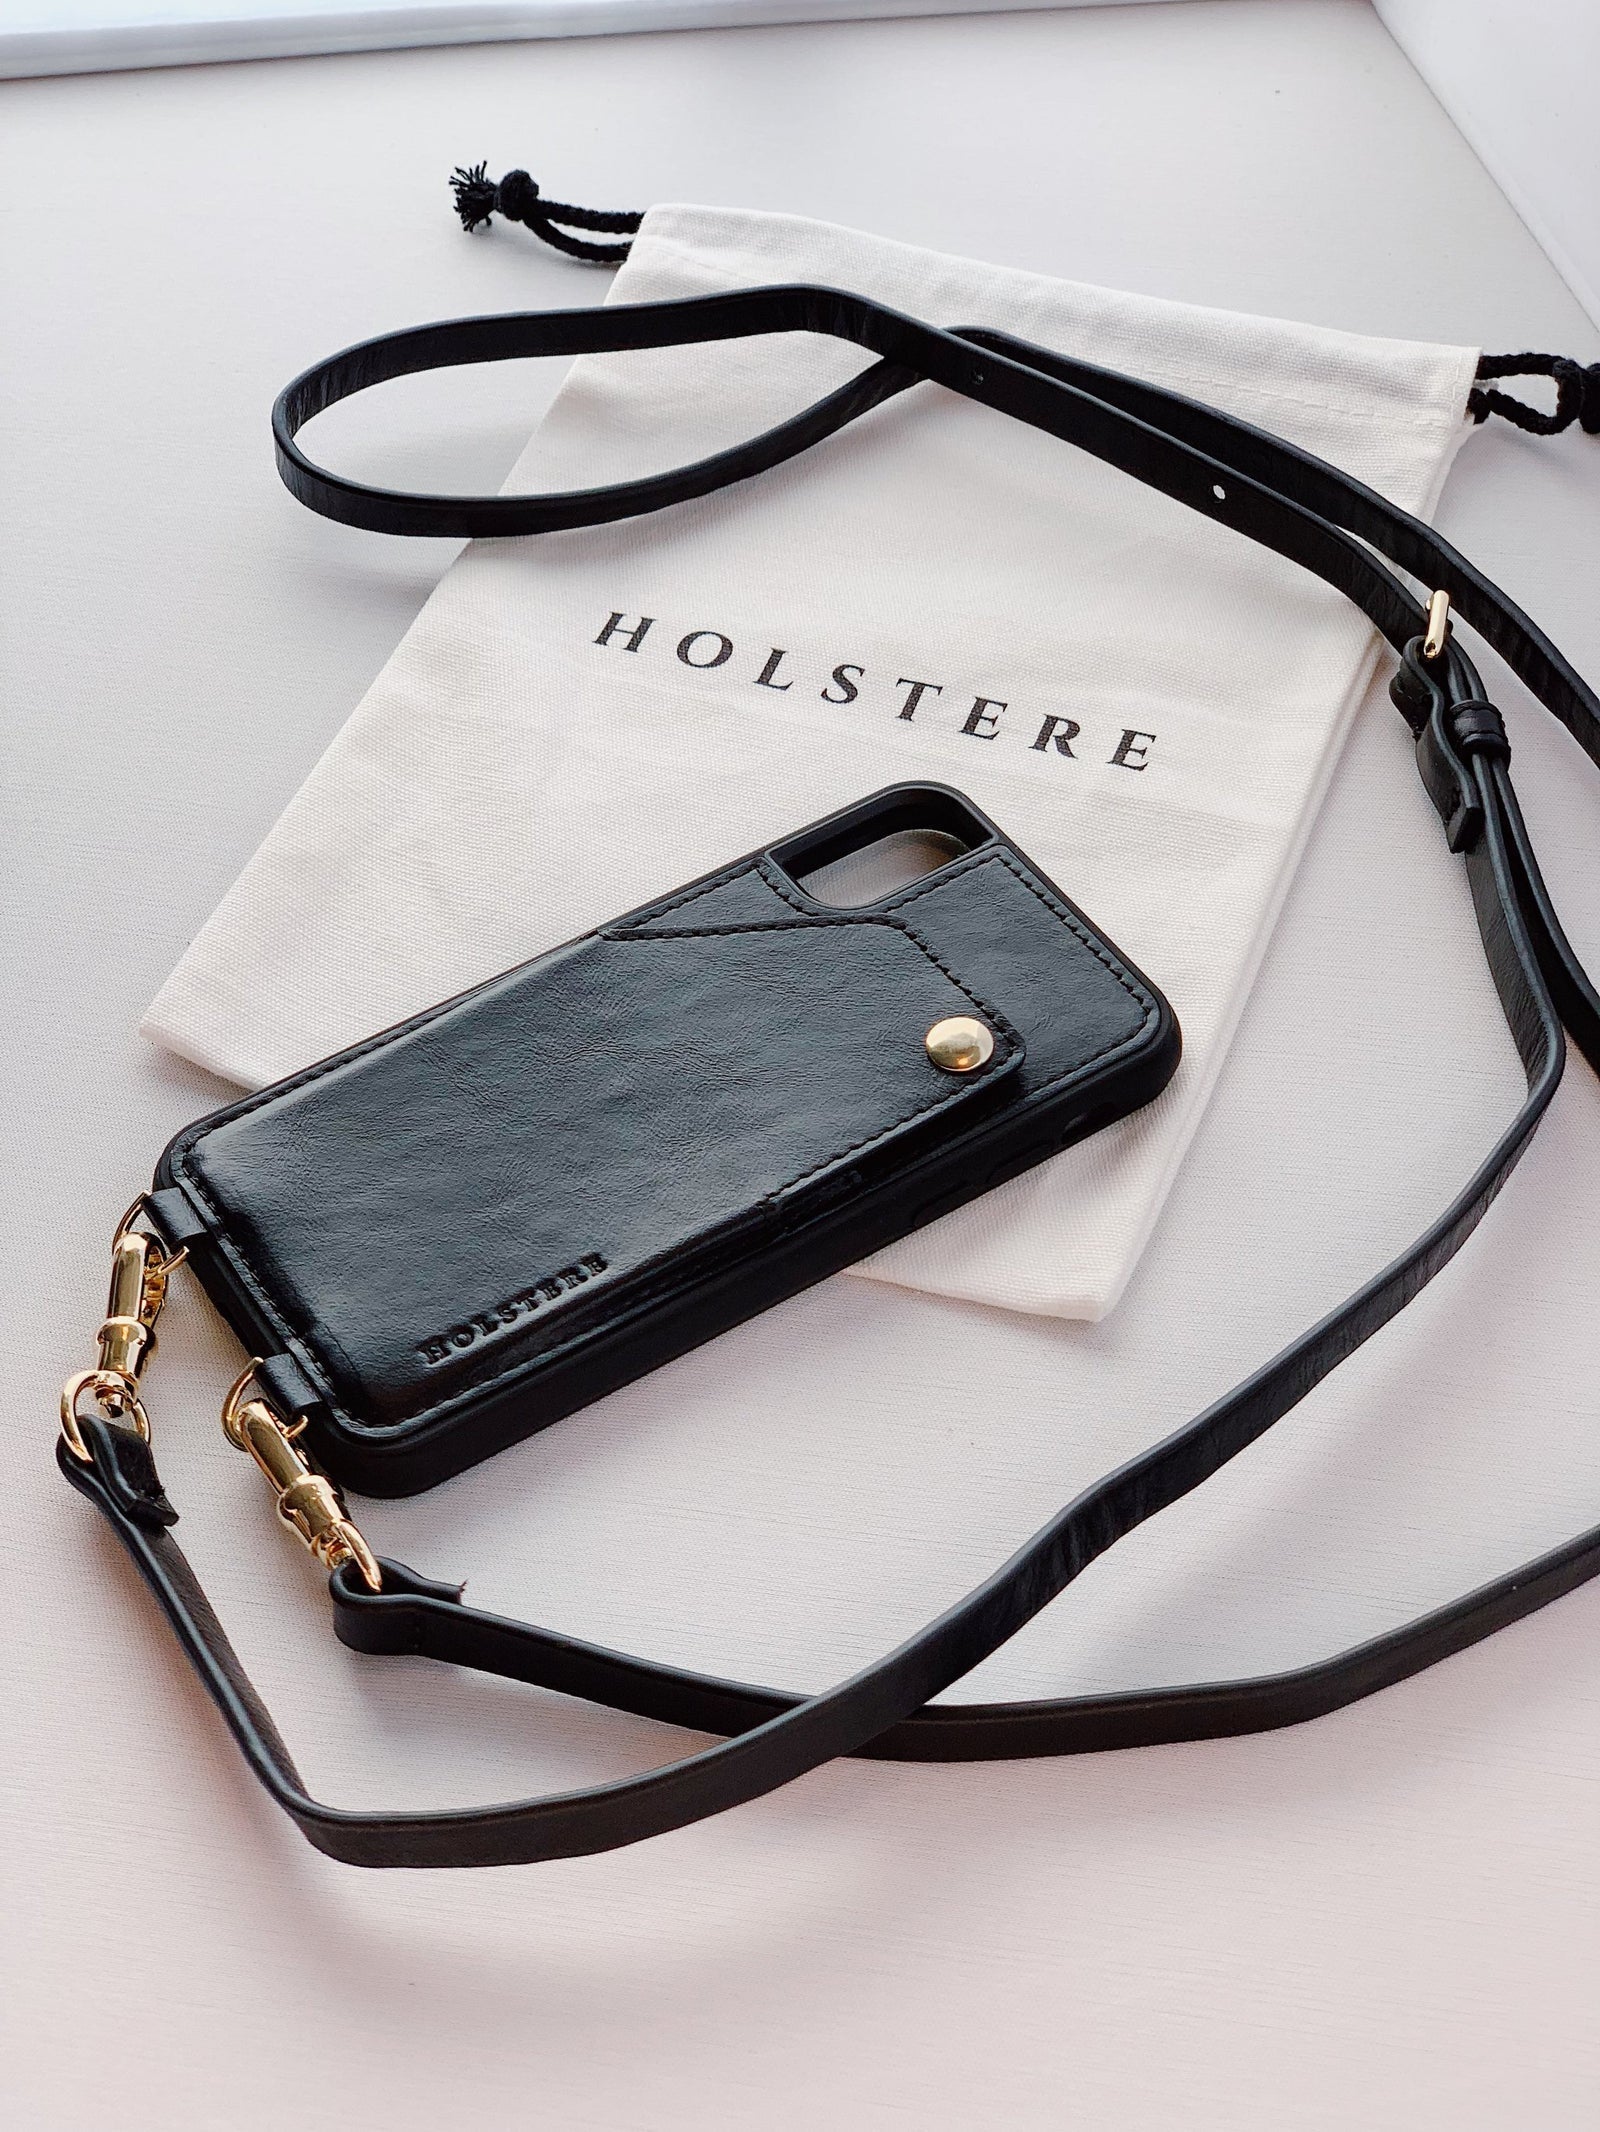 Holstere Black London iphone pouch with gold hardware